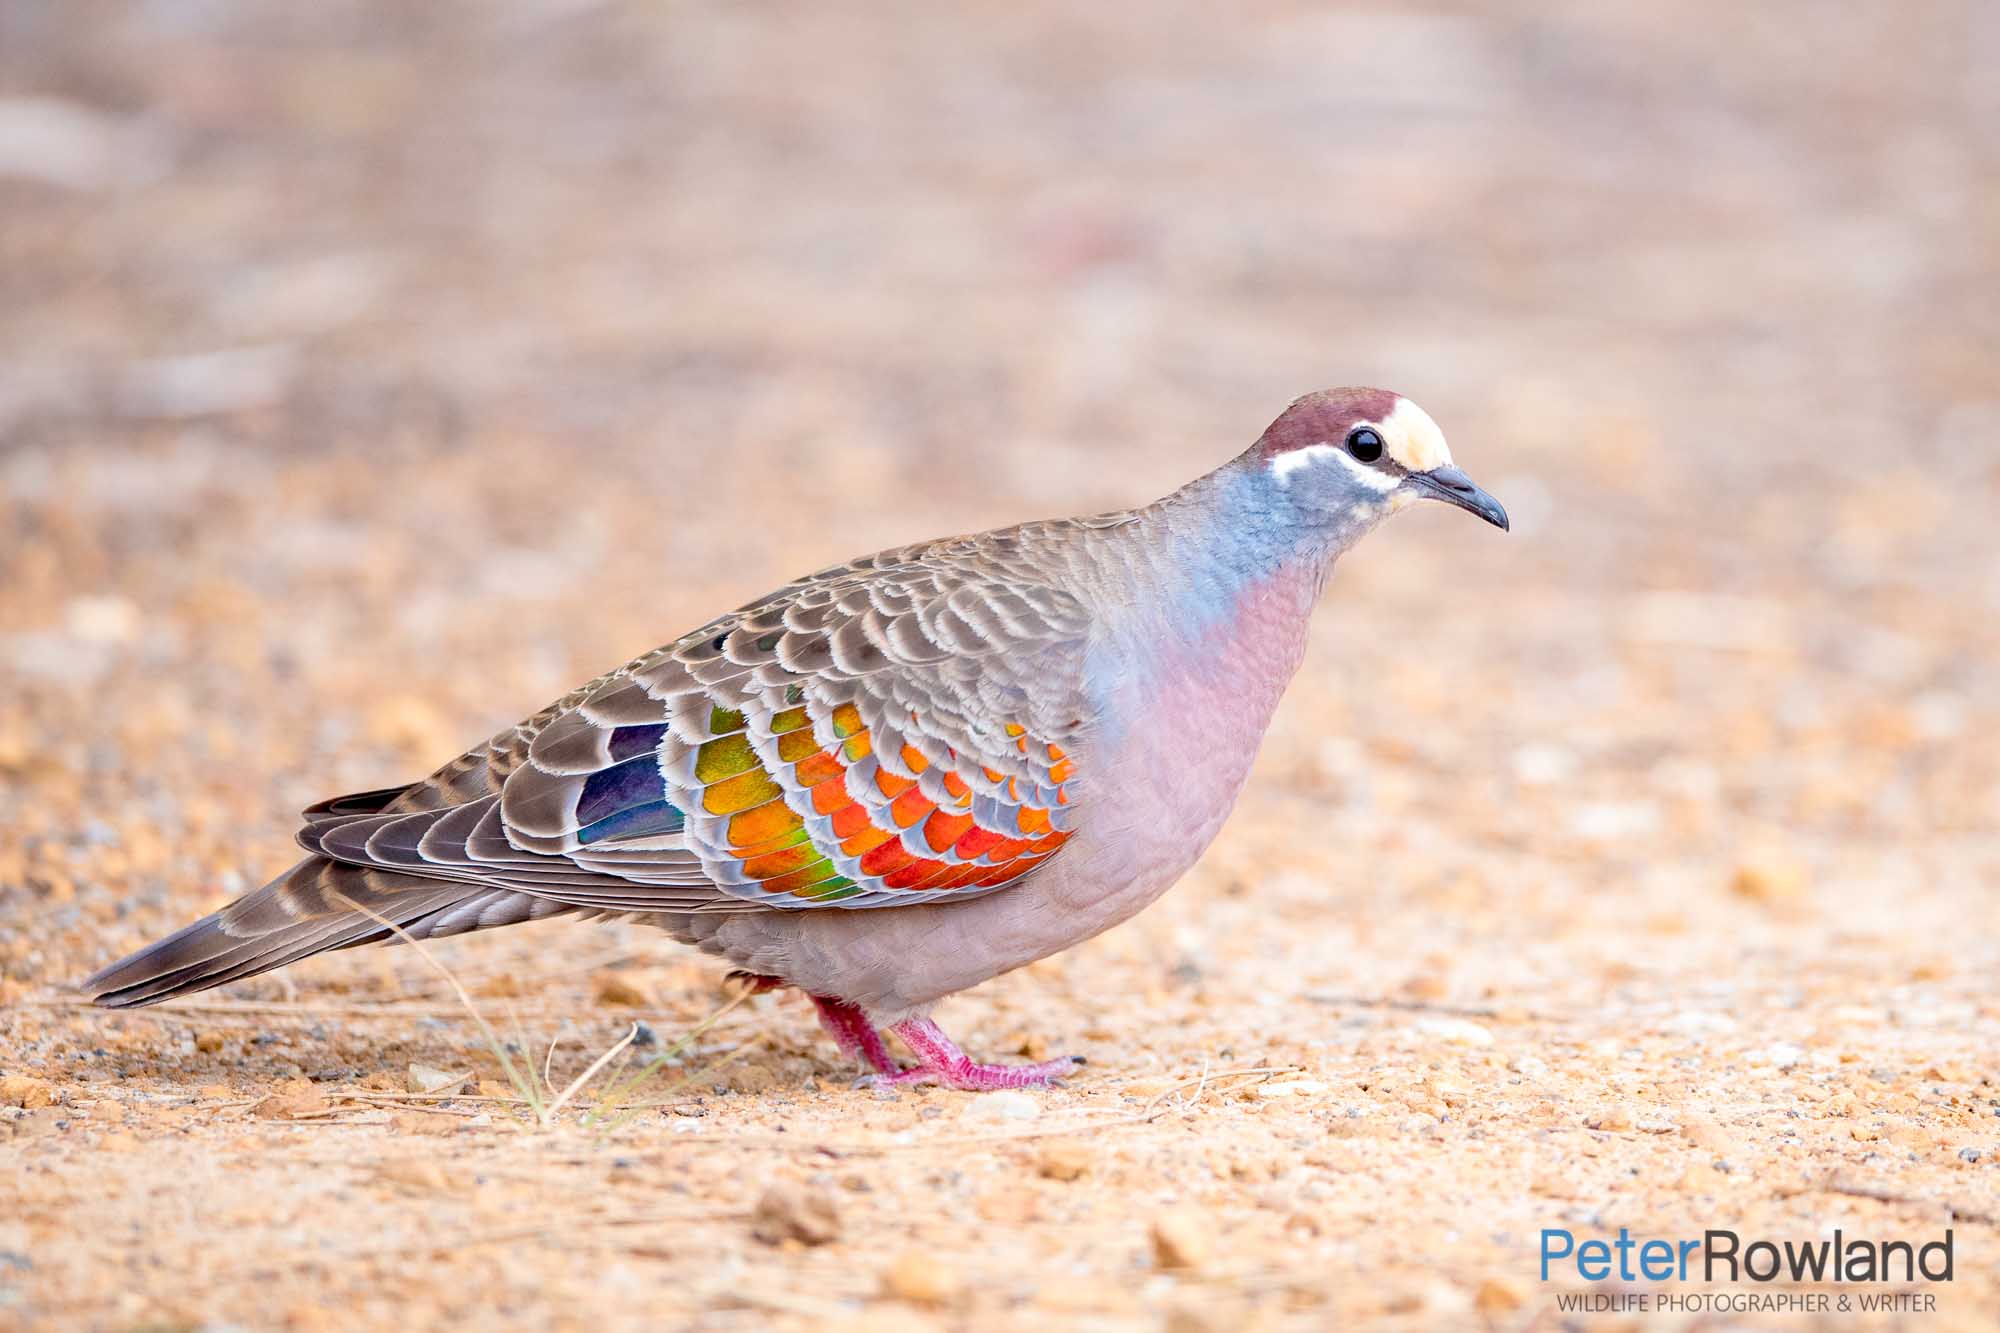 Common Bronzewing walking on bare ground by the side of a road